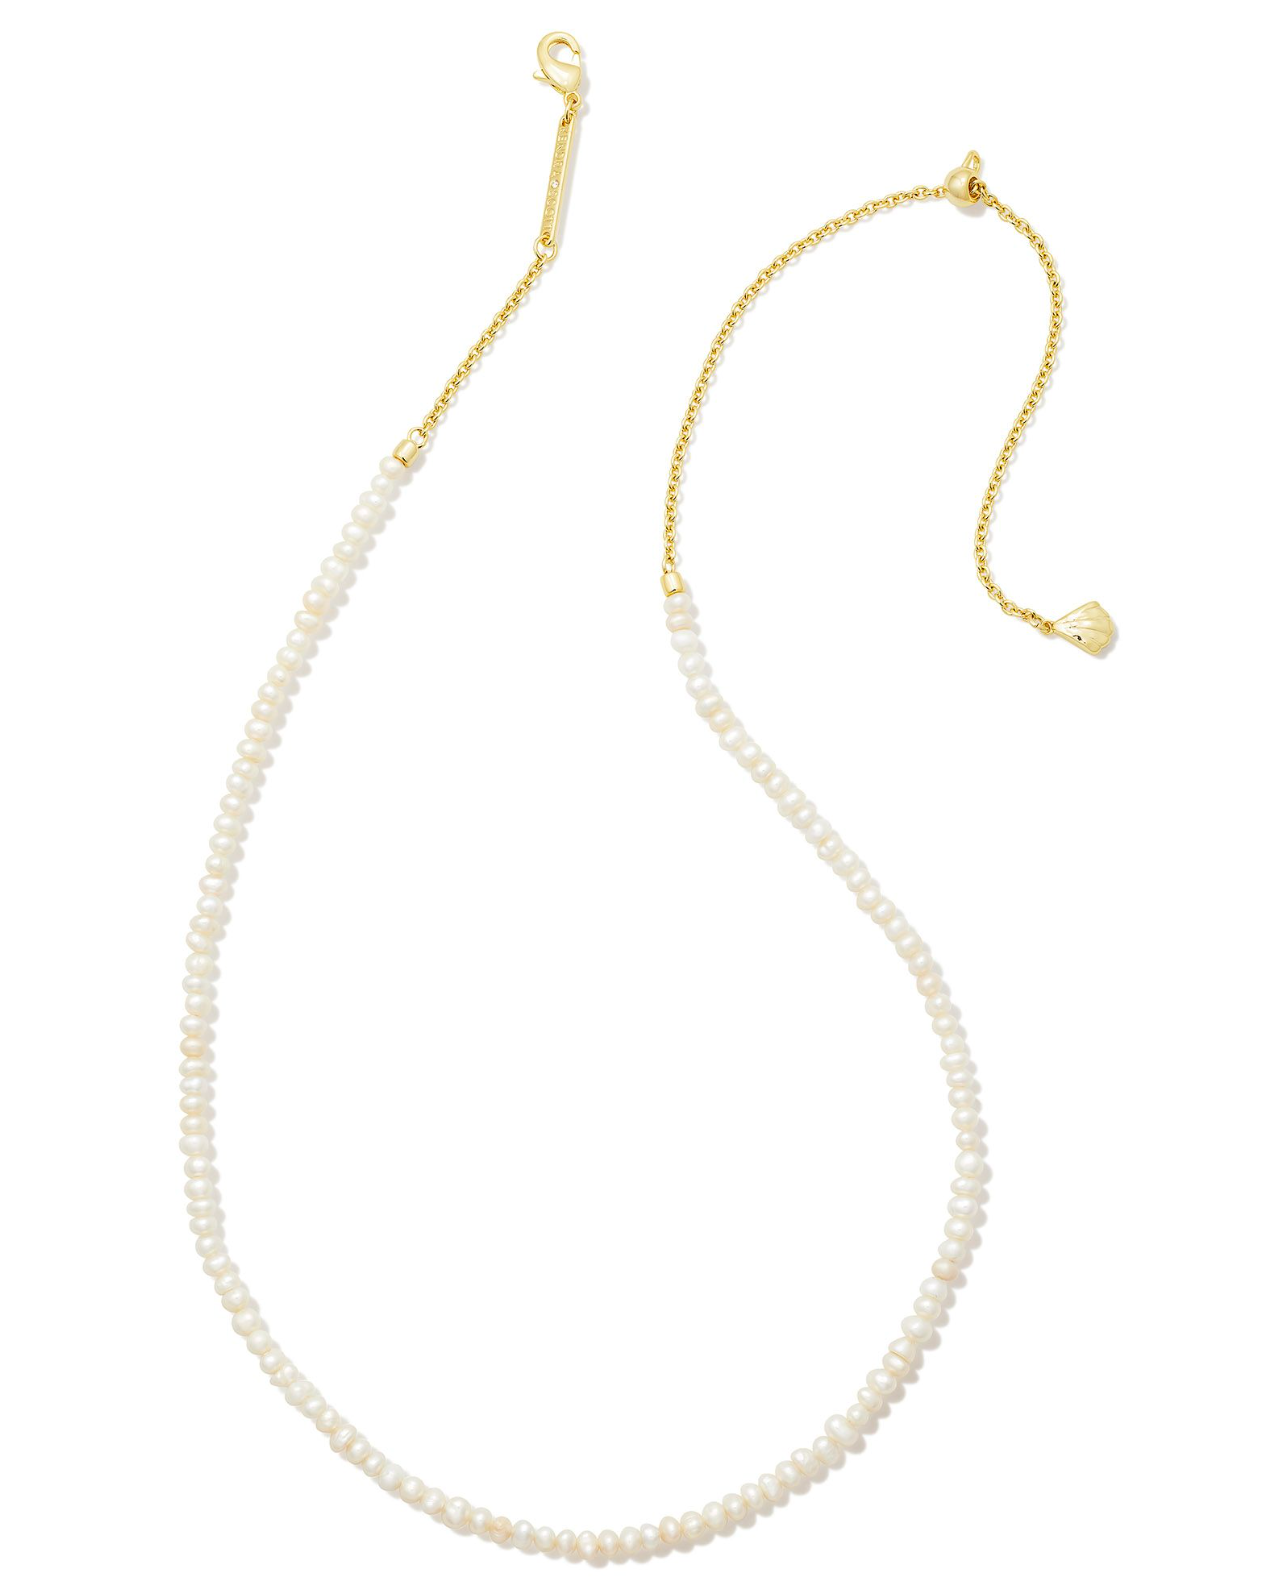 Lolo Gold Strand Necklace in White Pearl | KENDRA SCOTT